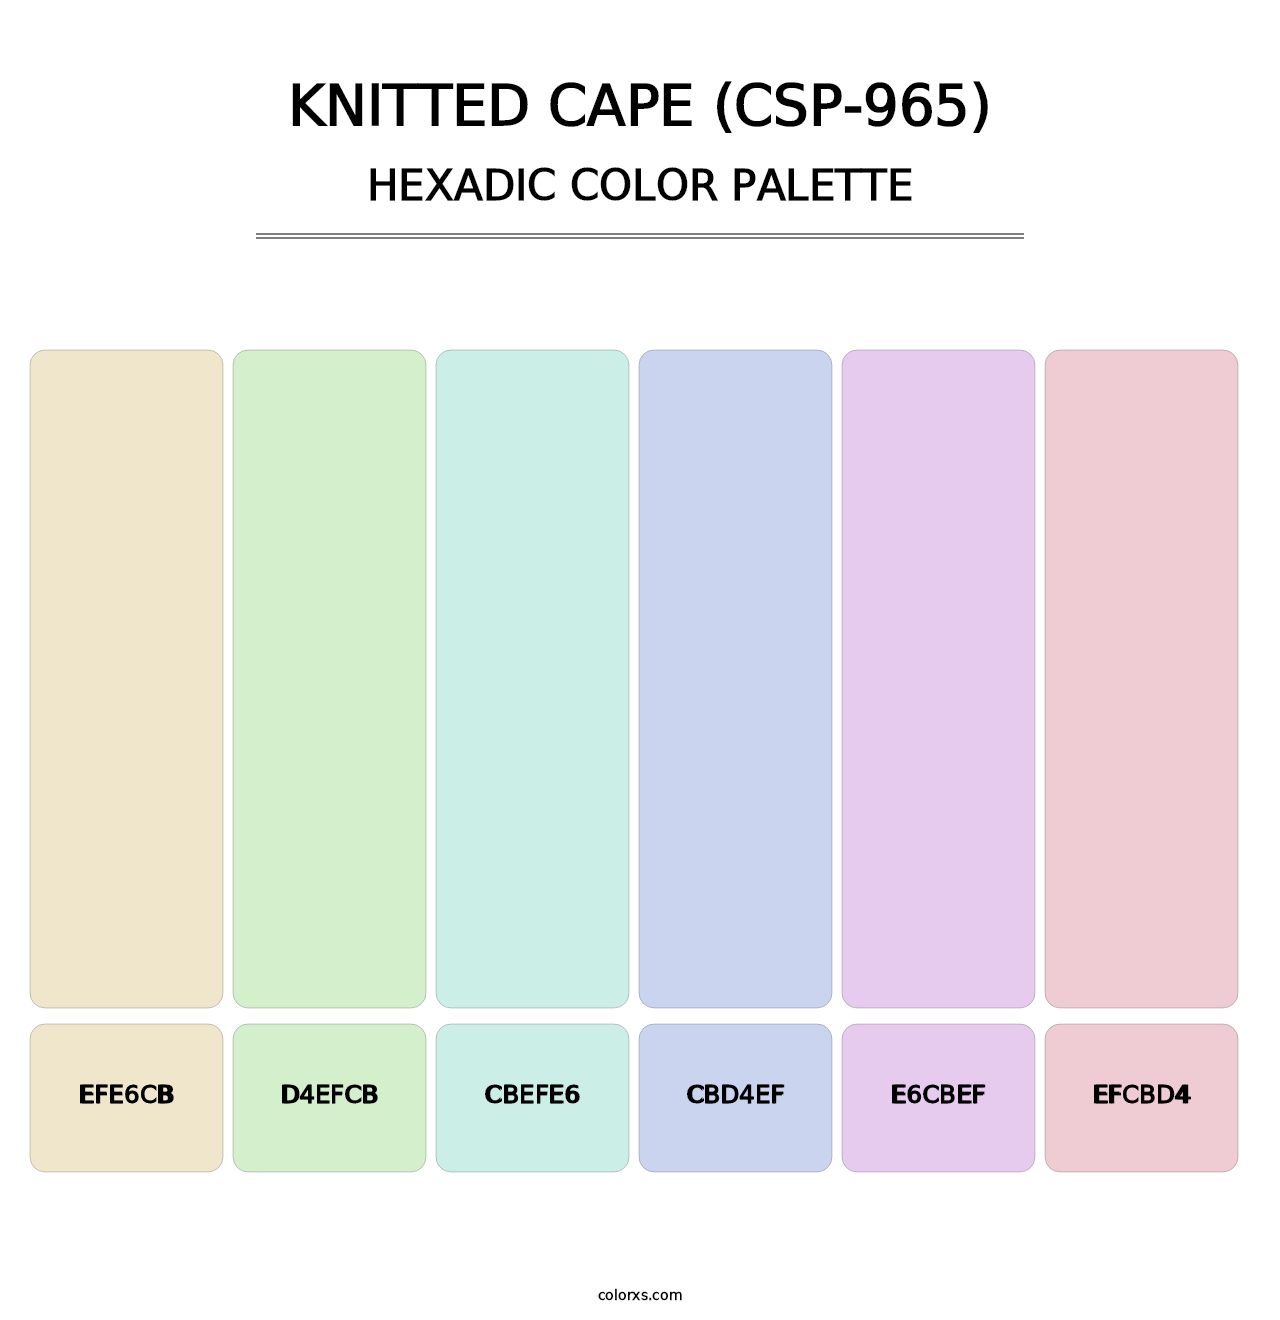 Knitted Cape (CSP-965) - Hexadic Color Palette